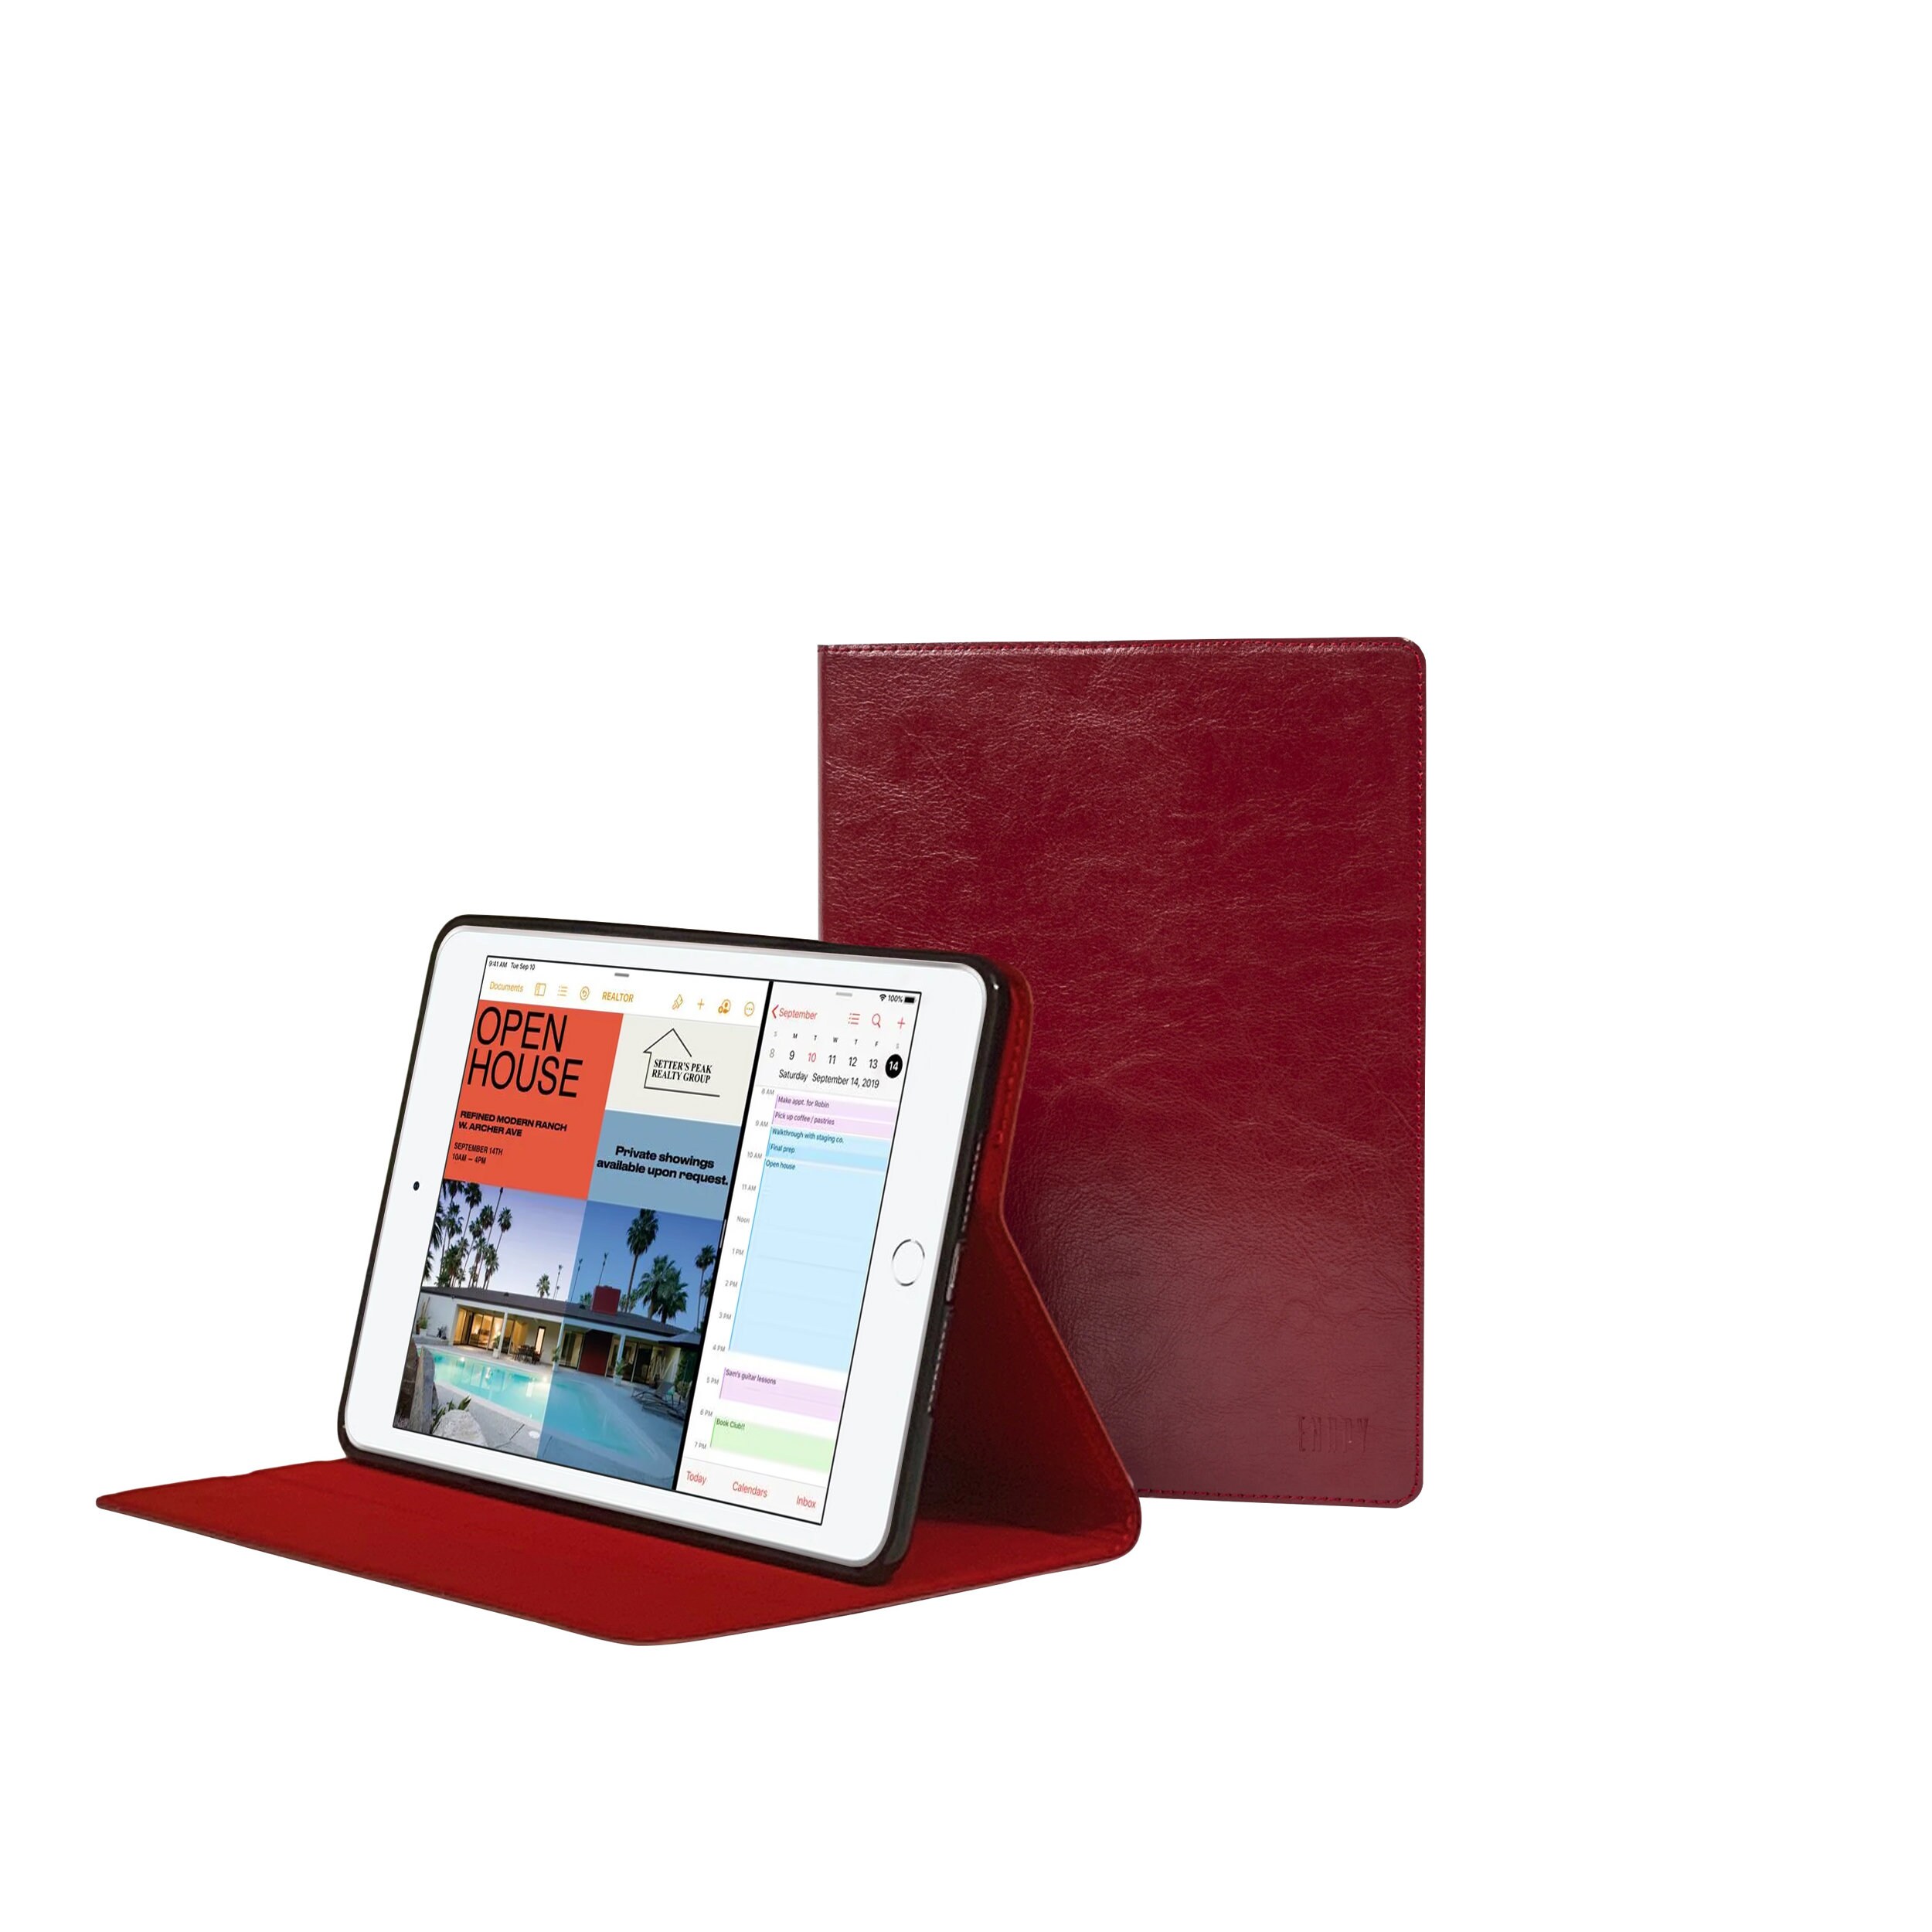 IPad Air 2 Leather Case Cover Red Genuine Cowhide Leather With Pencil  Holder With Sleep-wake 